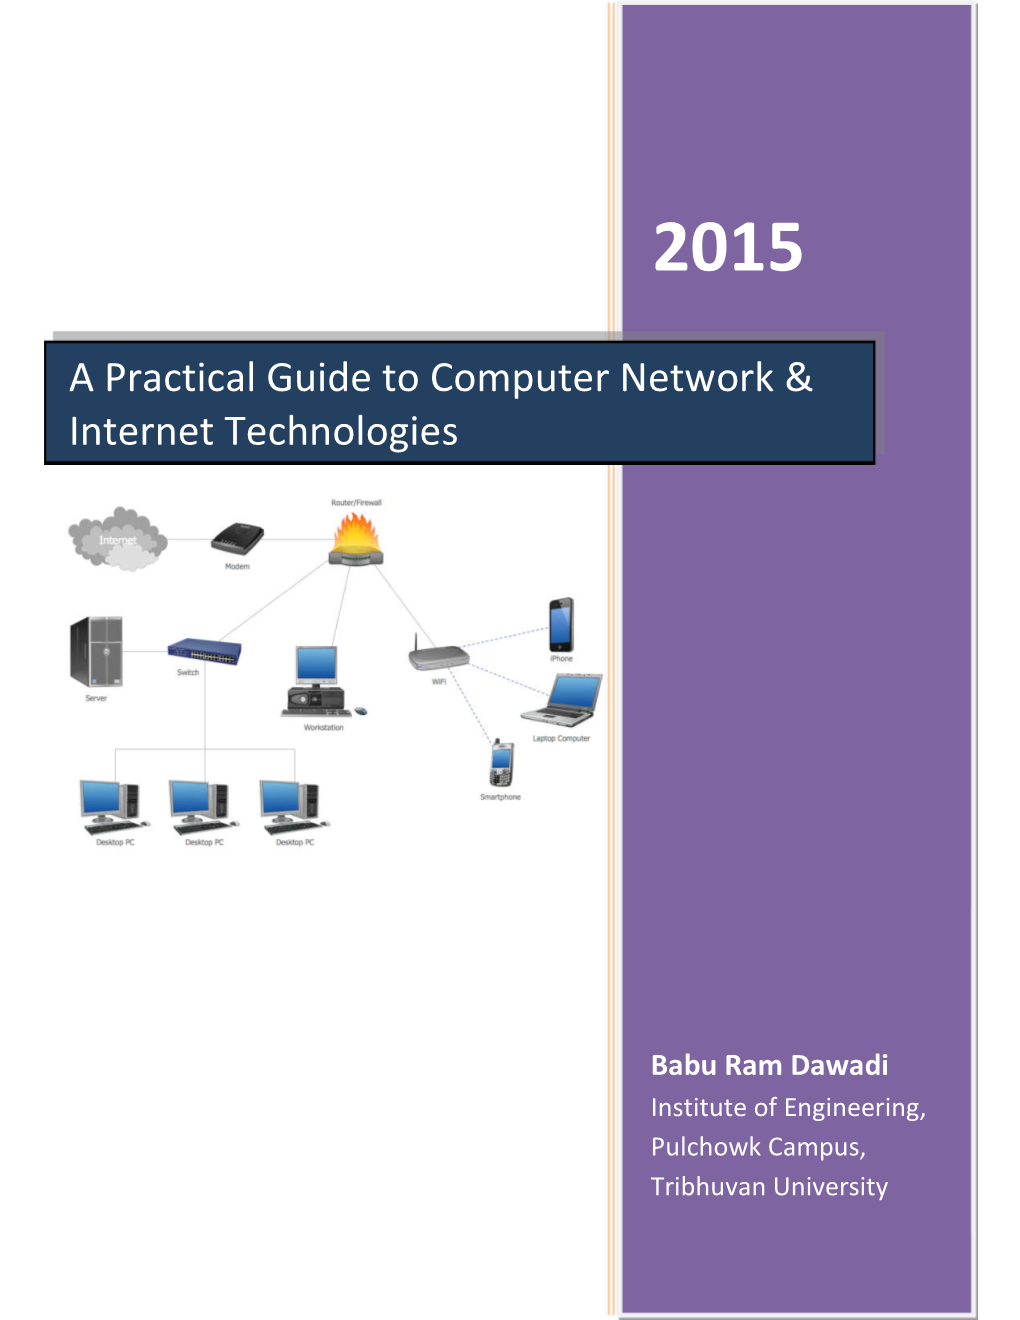 A Practical Guide to Computer Network & Internet Technologies